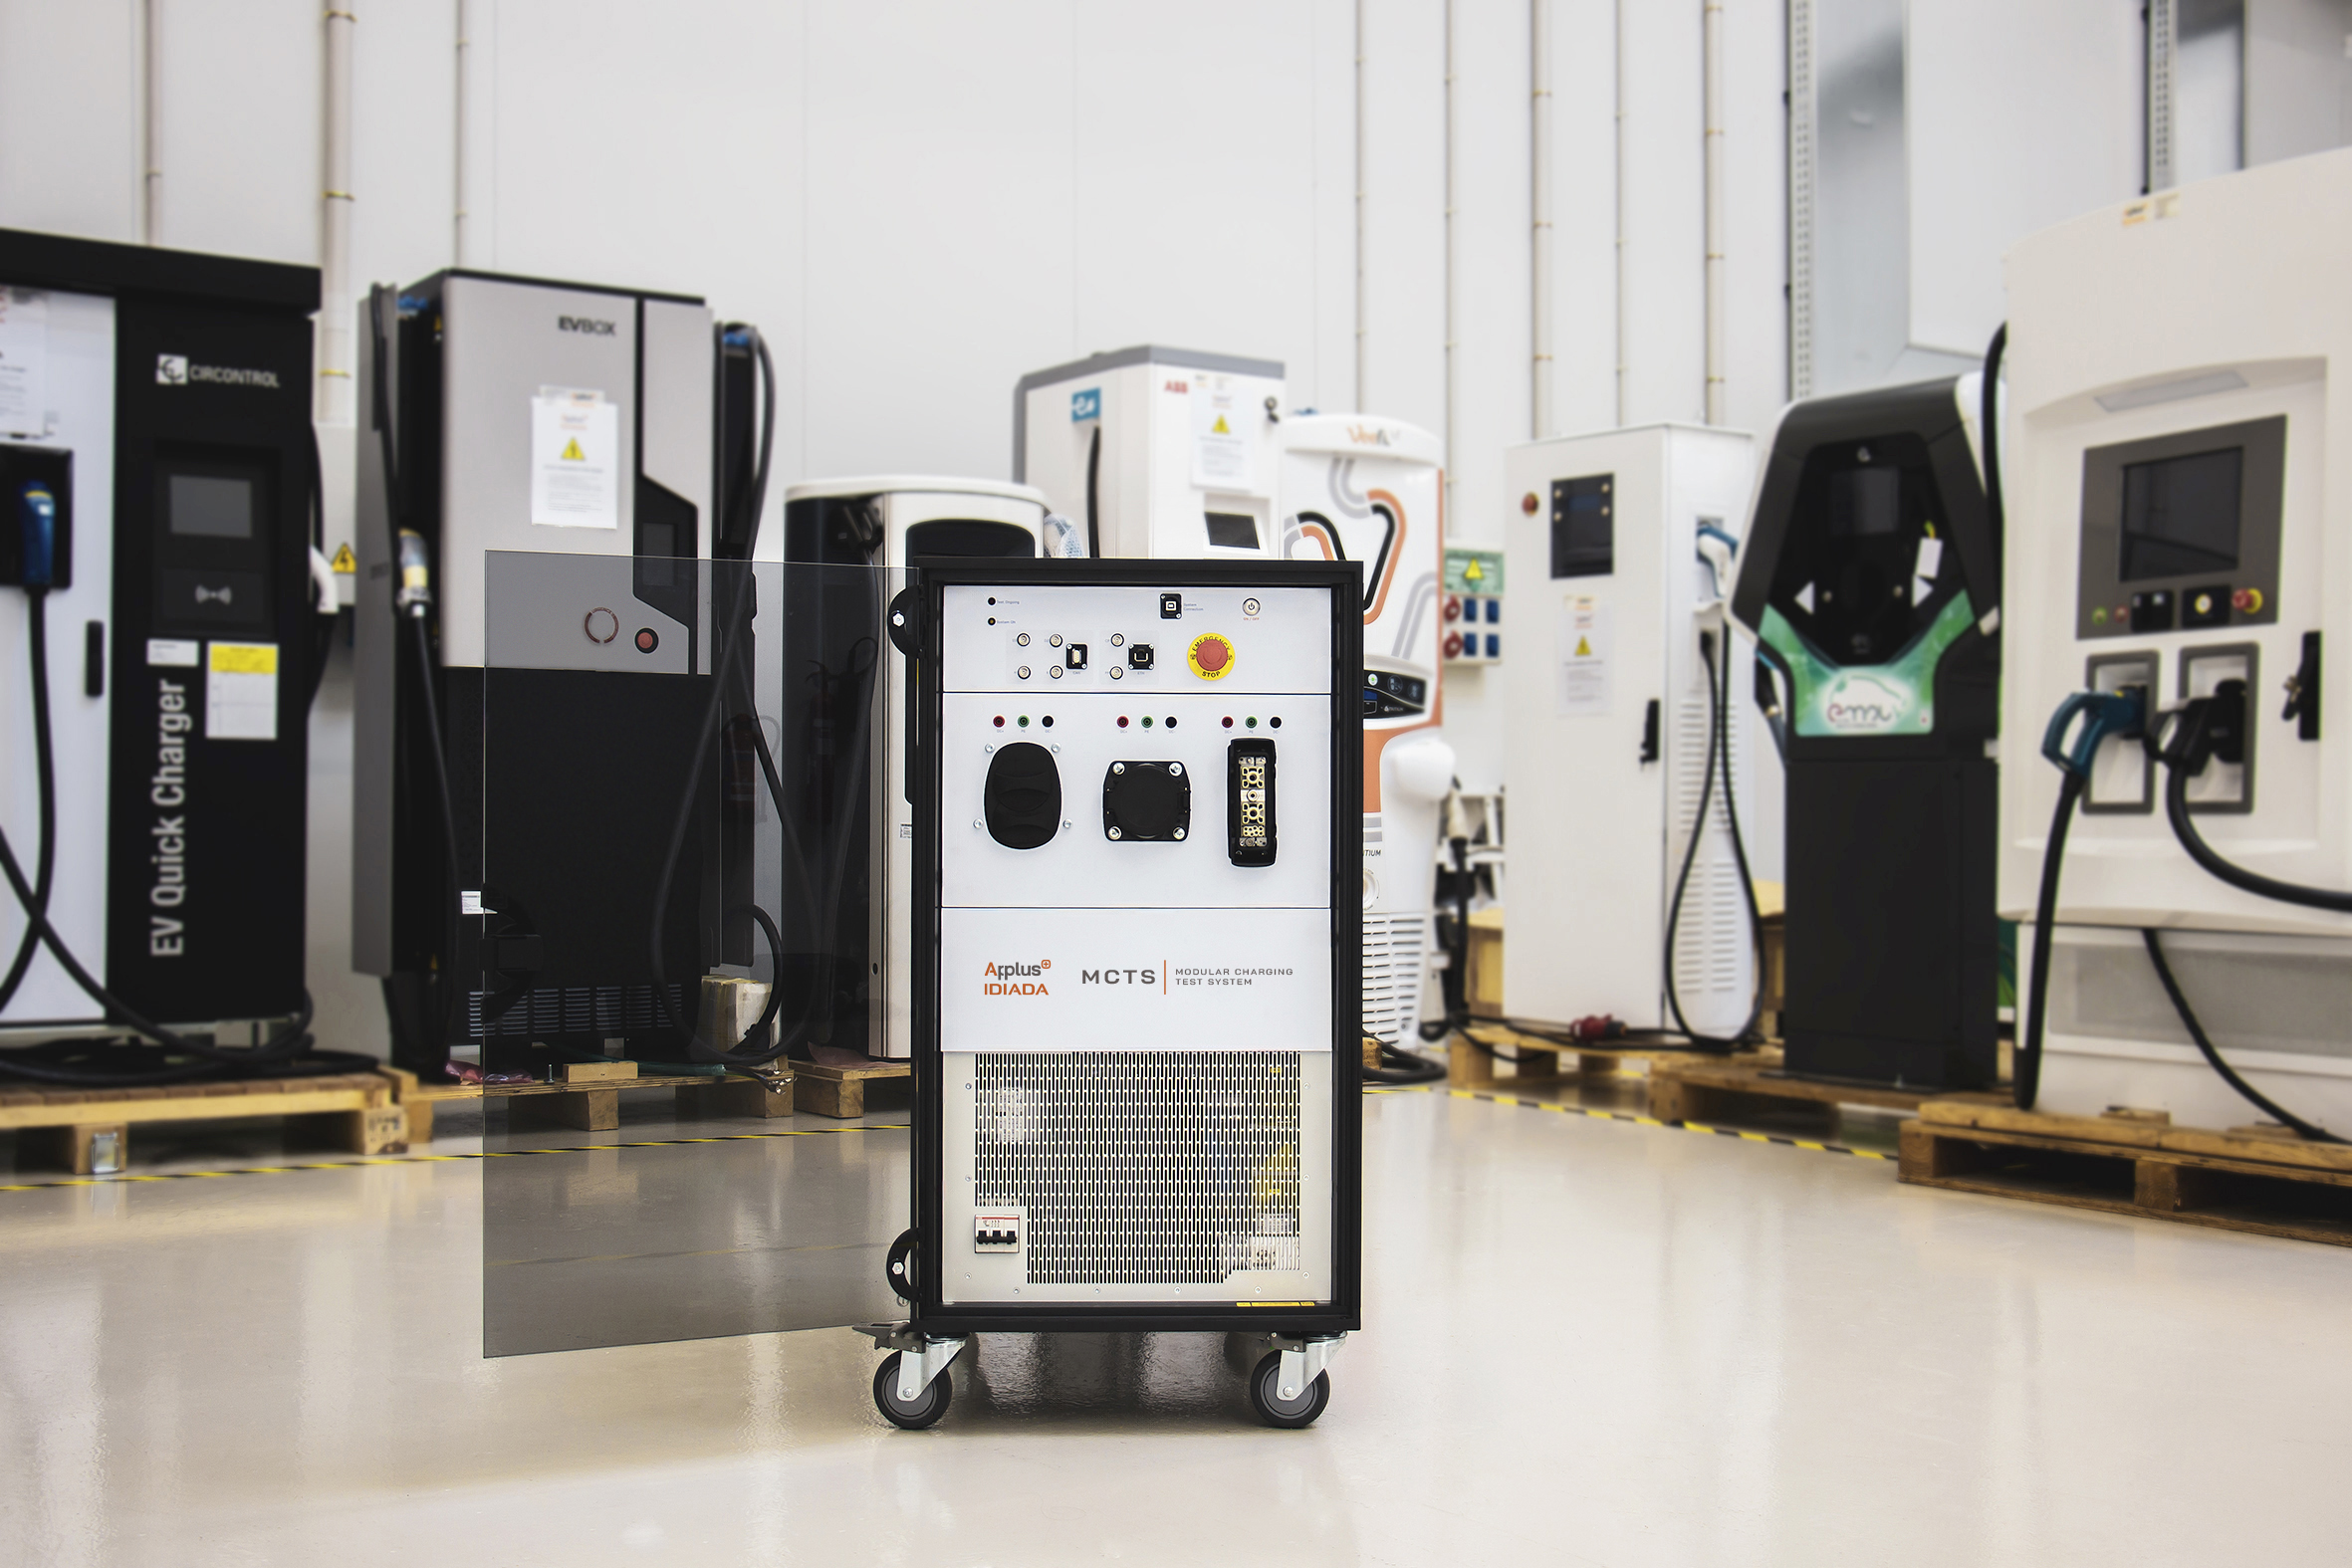 Charging Systems development and testing. IDIADA's Modular Charging Test System covers diverse charging standards